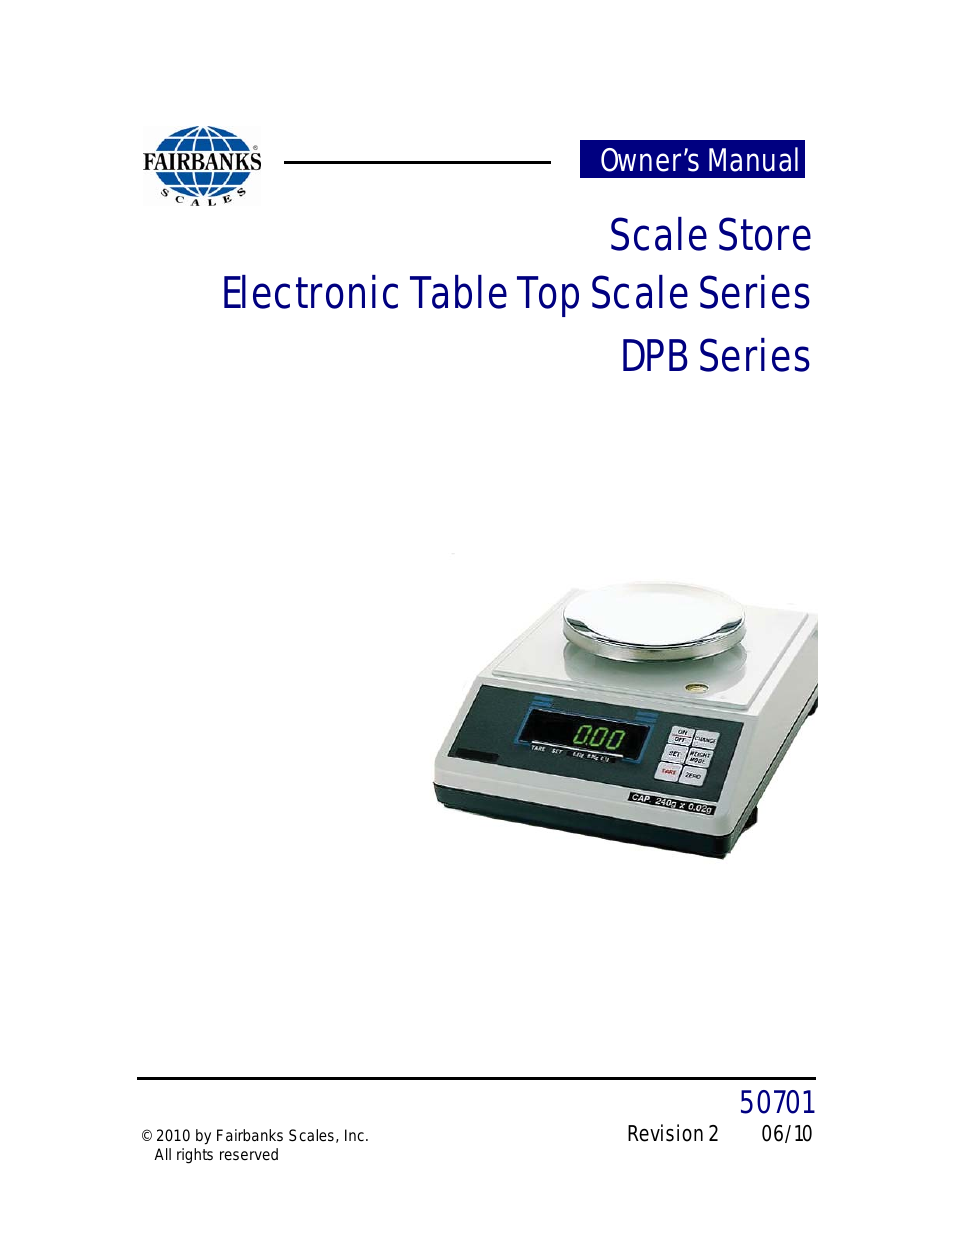 DPB Series Scale Store